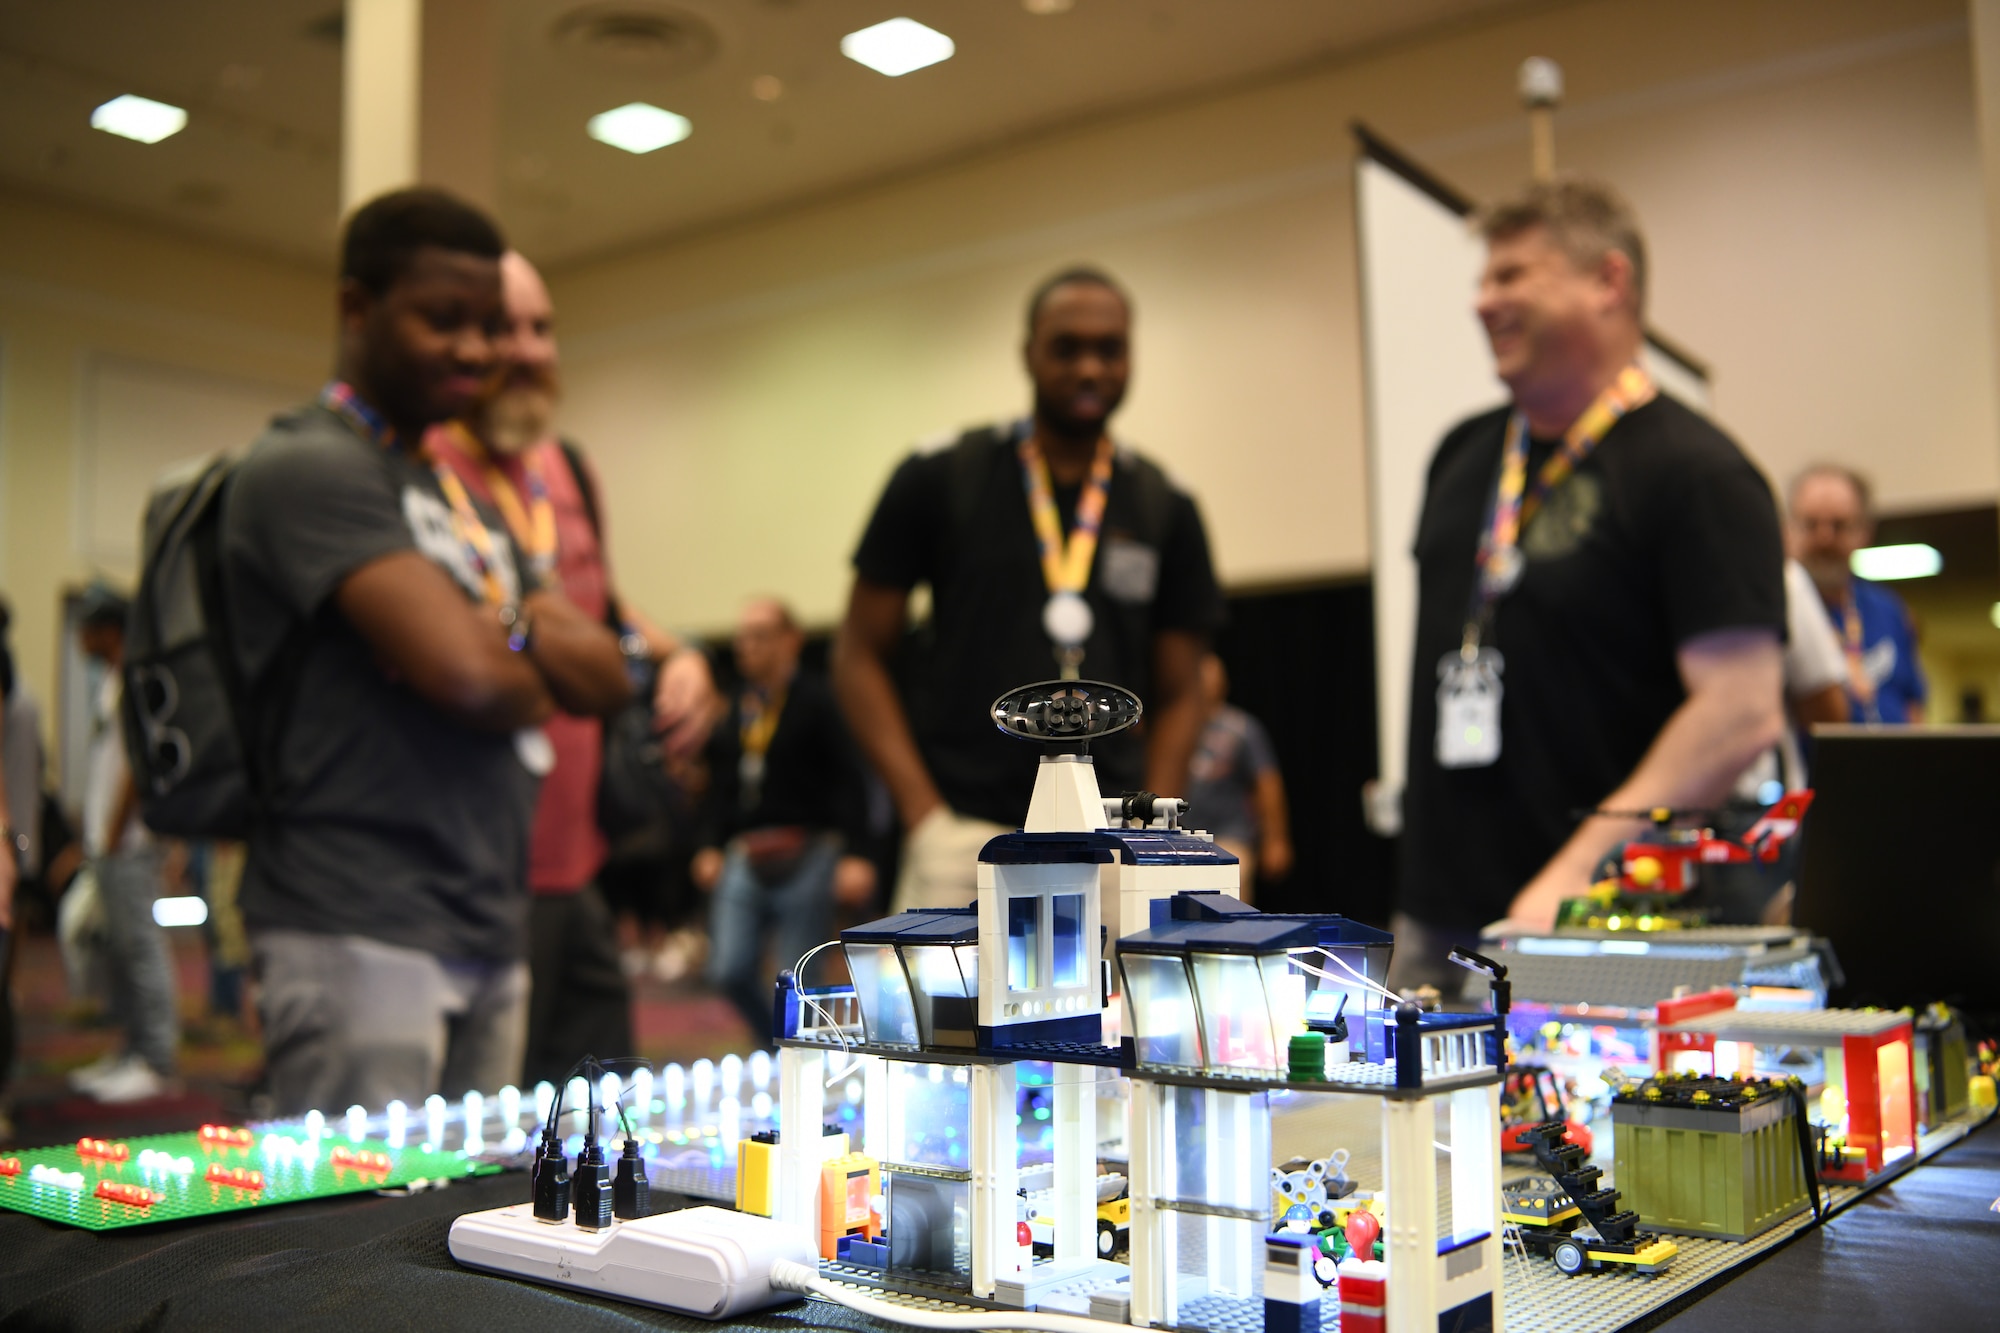 Attendees visit the 90th Cyberspace Operations Squadron “Bricks in the Loop” display during DEF CON 27 Hacking Conference in Las Vegas, Aug. 9, 2019. “Bricks in the Loop” mimics an Air Force installation to simulate real-world cyber systems in training cyber operators. (U.S. Air Force photo by Tech. Sgt. R.J. Biermann)